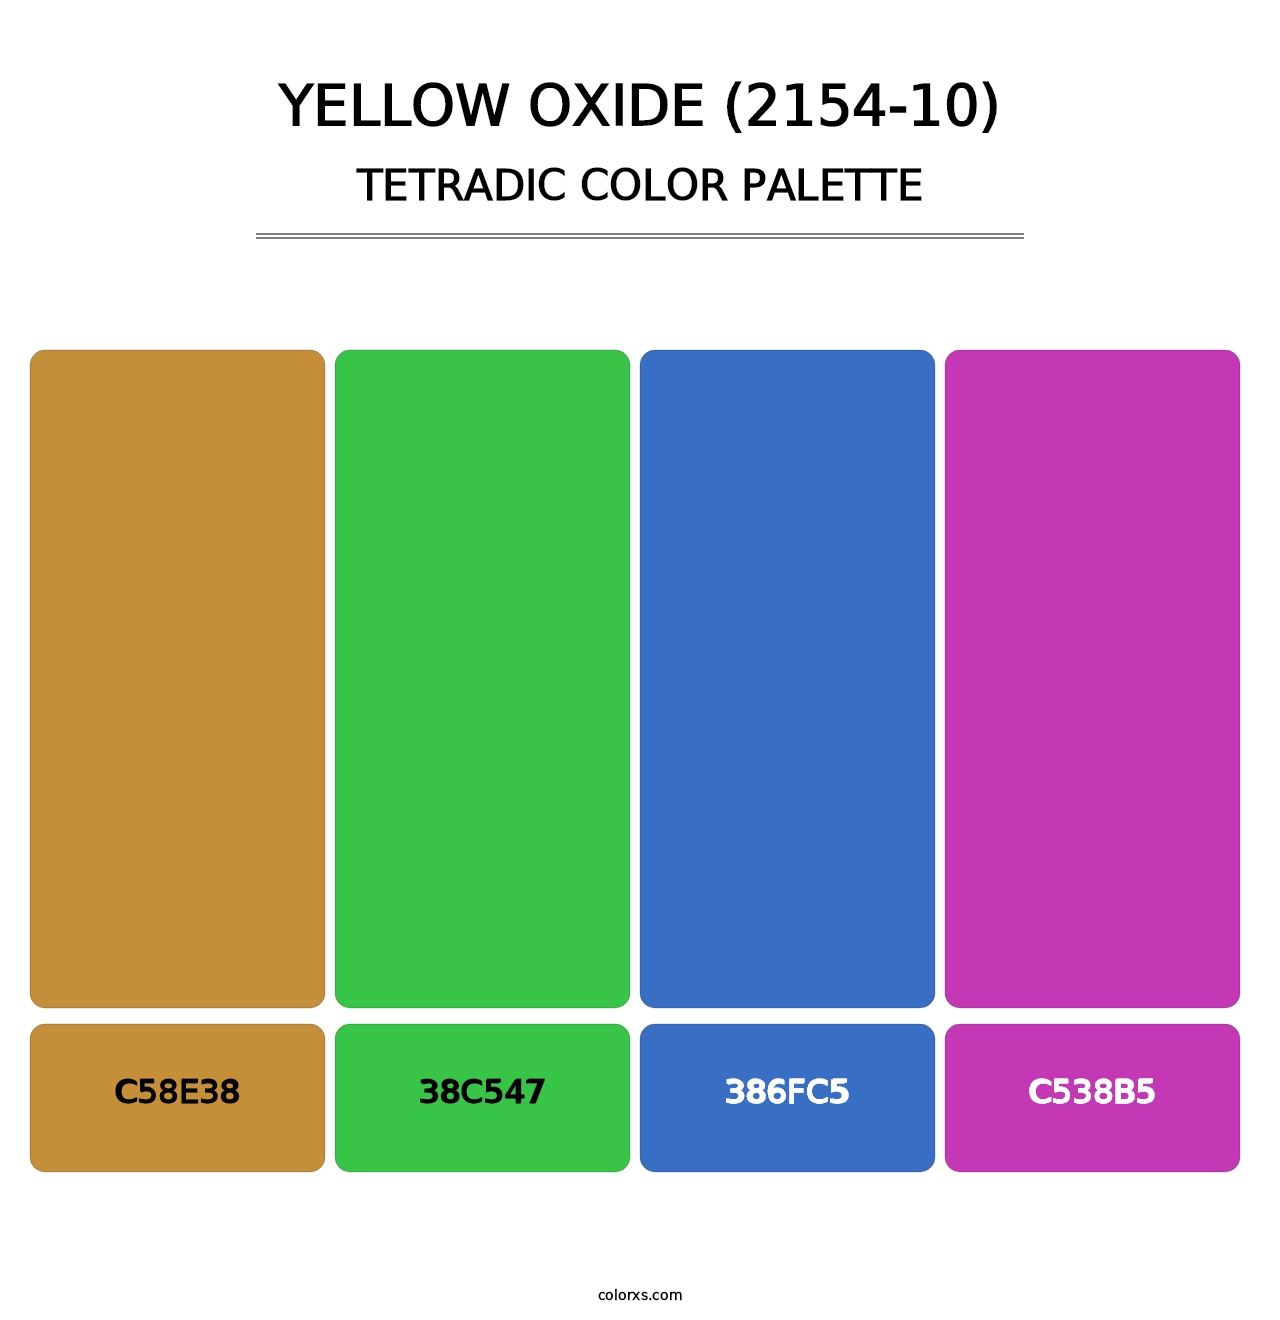 Yellow Oxide (2154-10) - Tetradic Color Palette